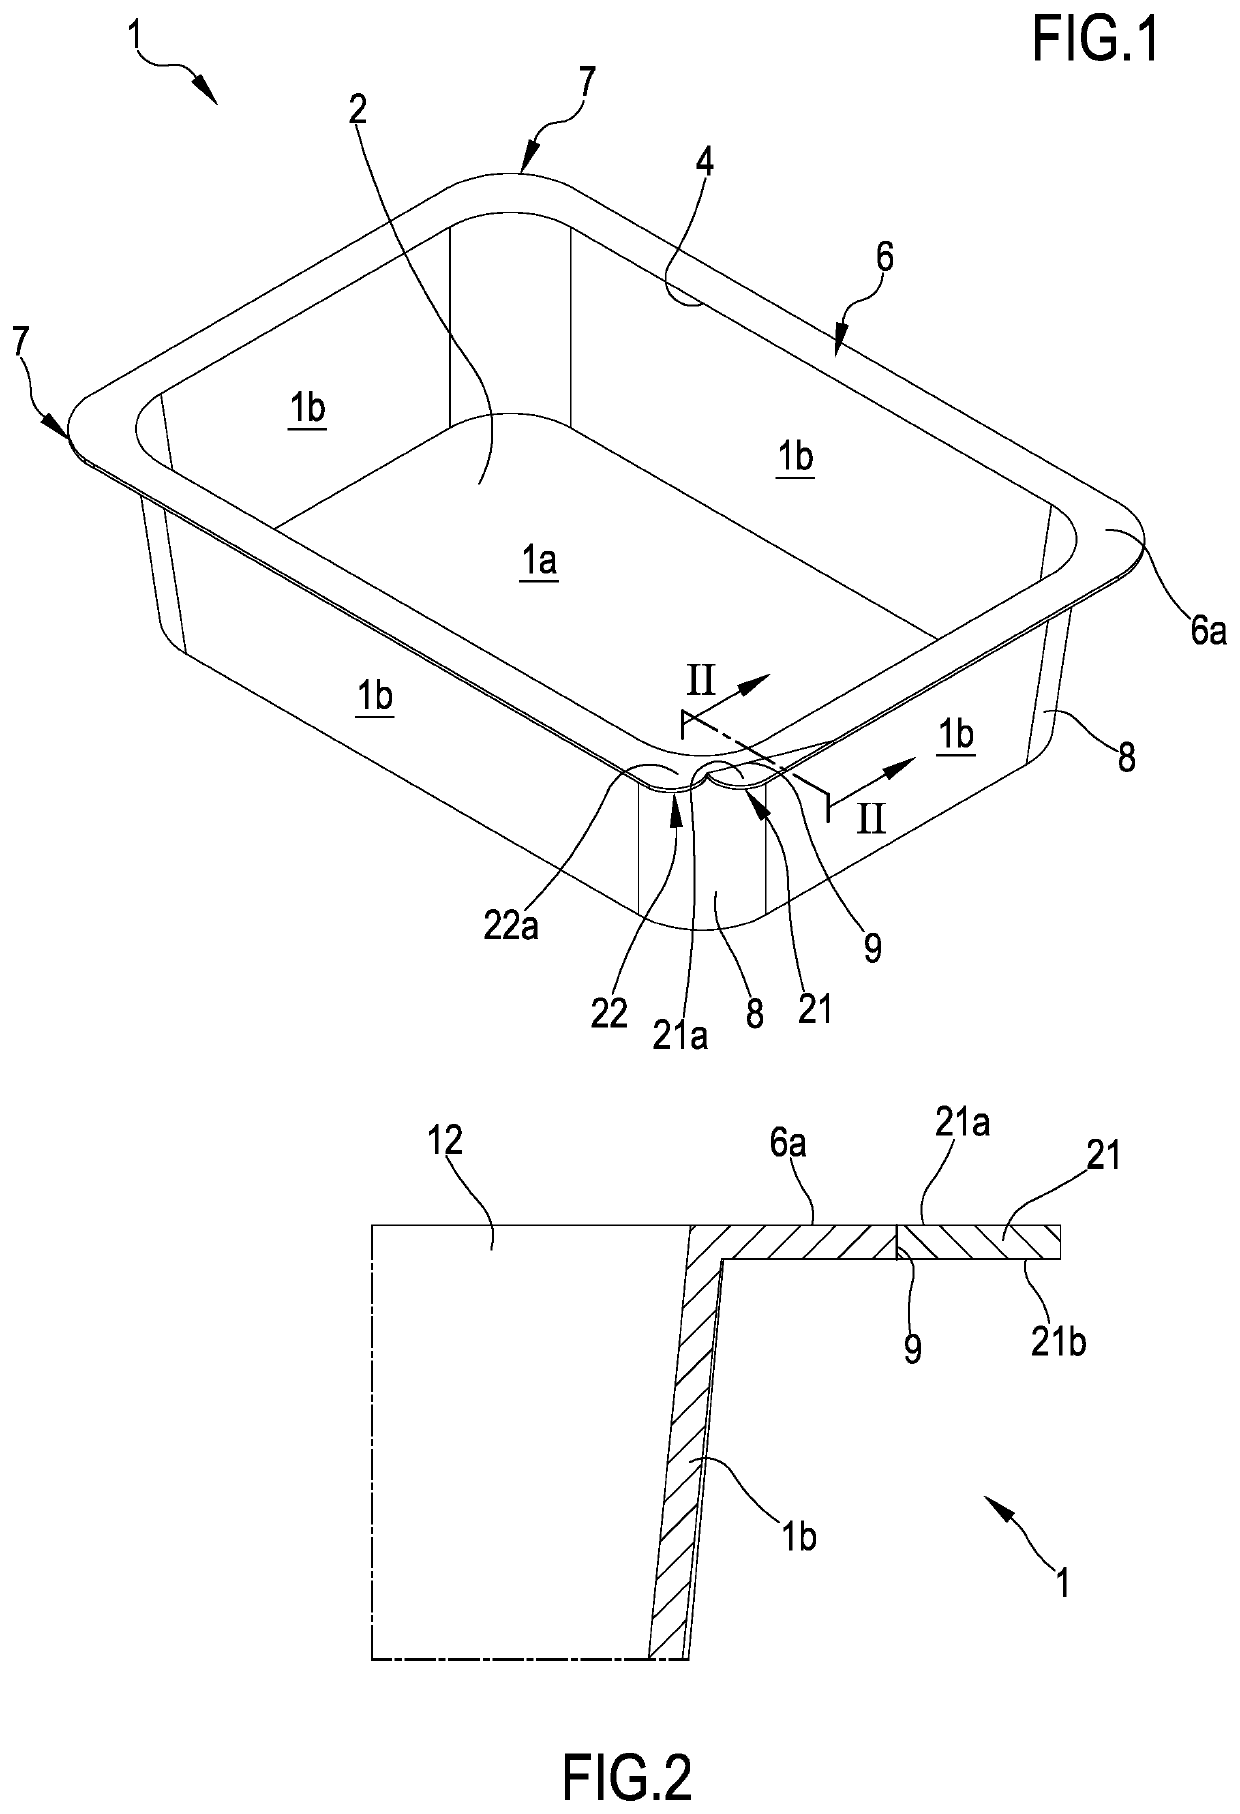 Package, apparatus and process of manufacturing such a package